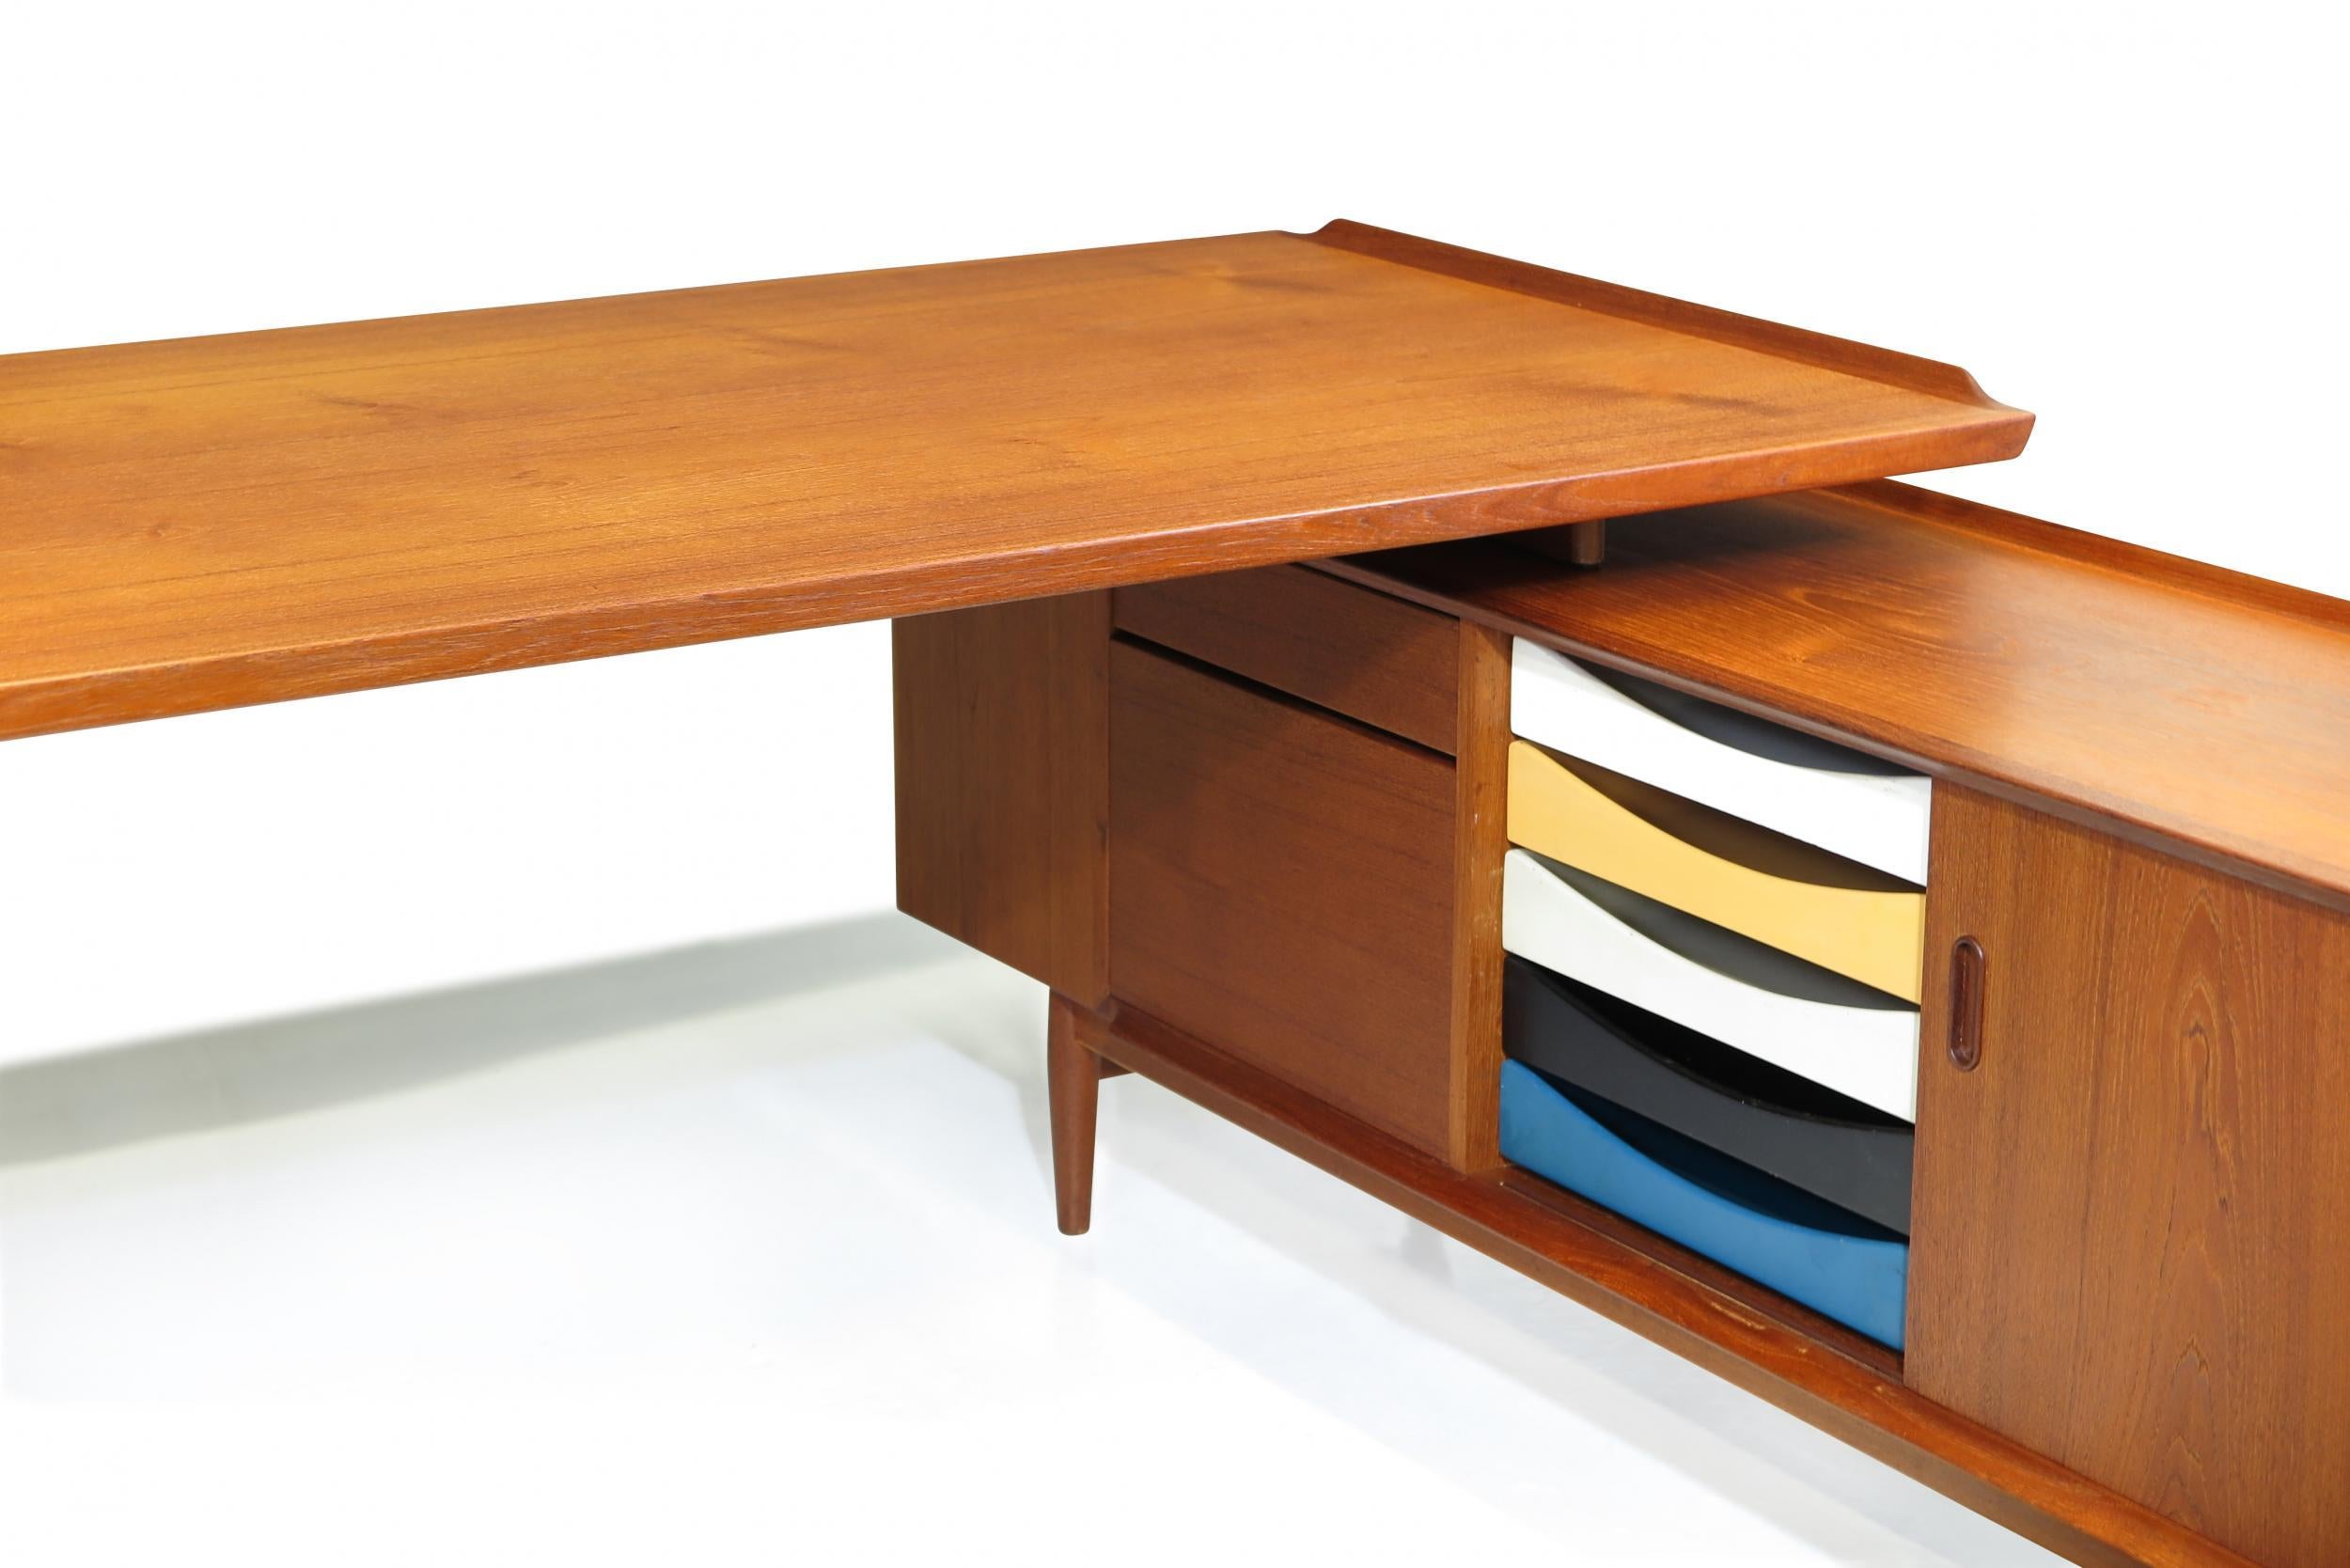 Mid Century Scandinavian executive desk and credenza designed by Arne Vodder for Sibast Mobelfrabrik, Denmark. Crafted of teak with raised edge and integrated sideboard. The desk has a locking drawer and filing cabinet; credenza return with cabinet